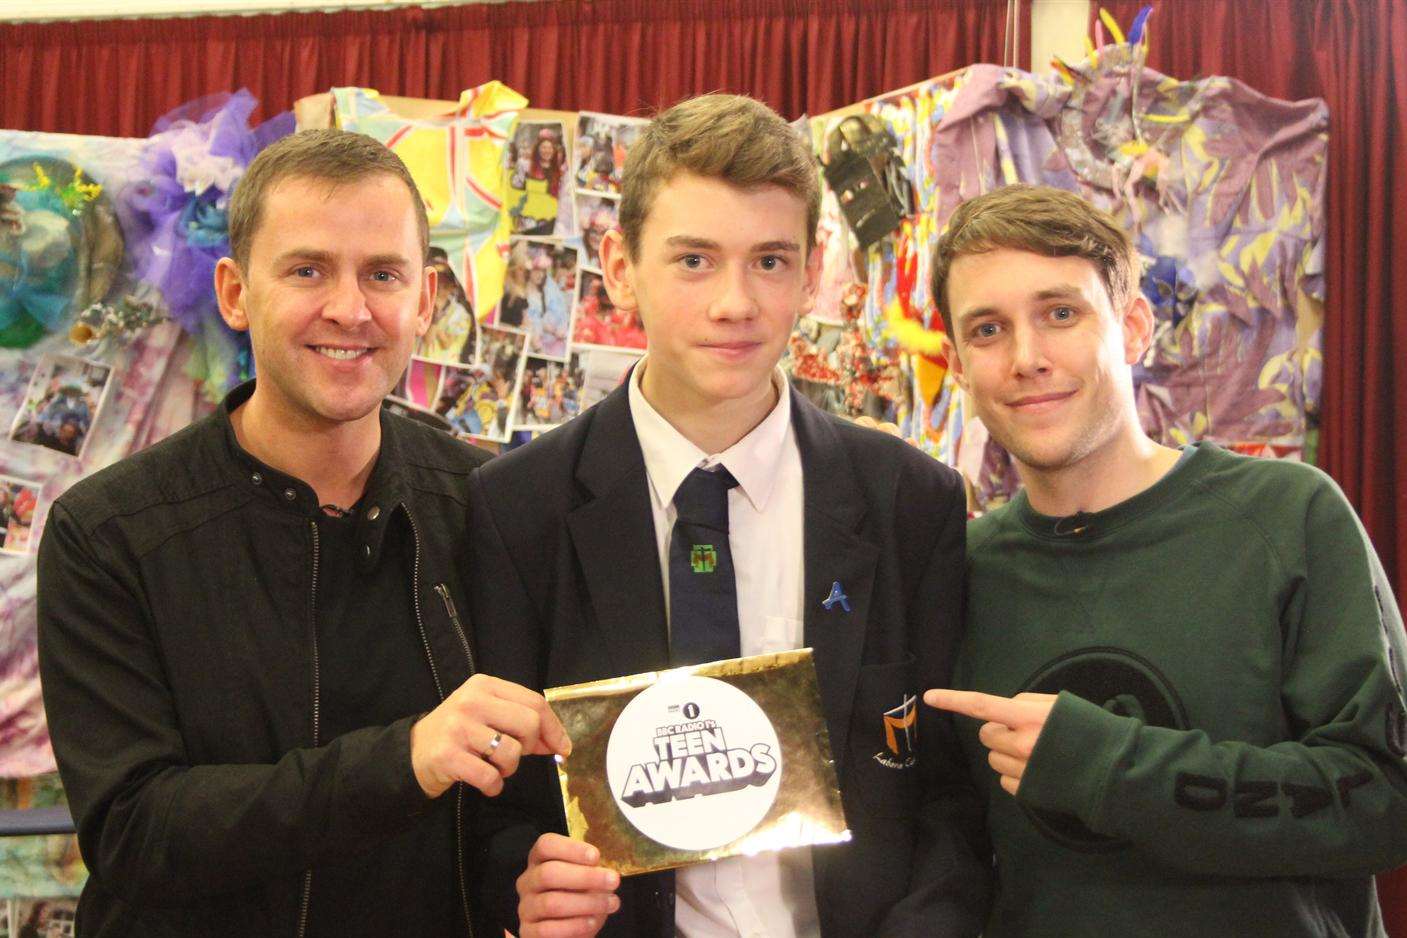 Jack Gregory from St Simon Stock School with Radio 1 DJ Scott Mills and his co-host Chris Stark